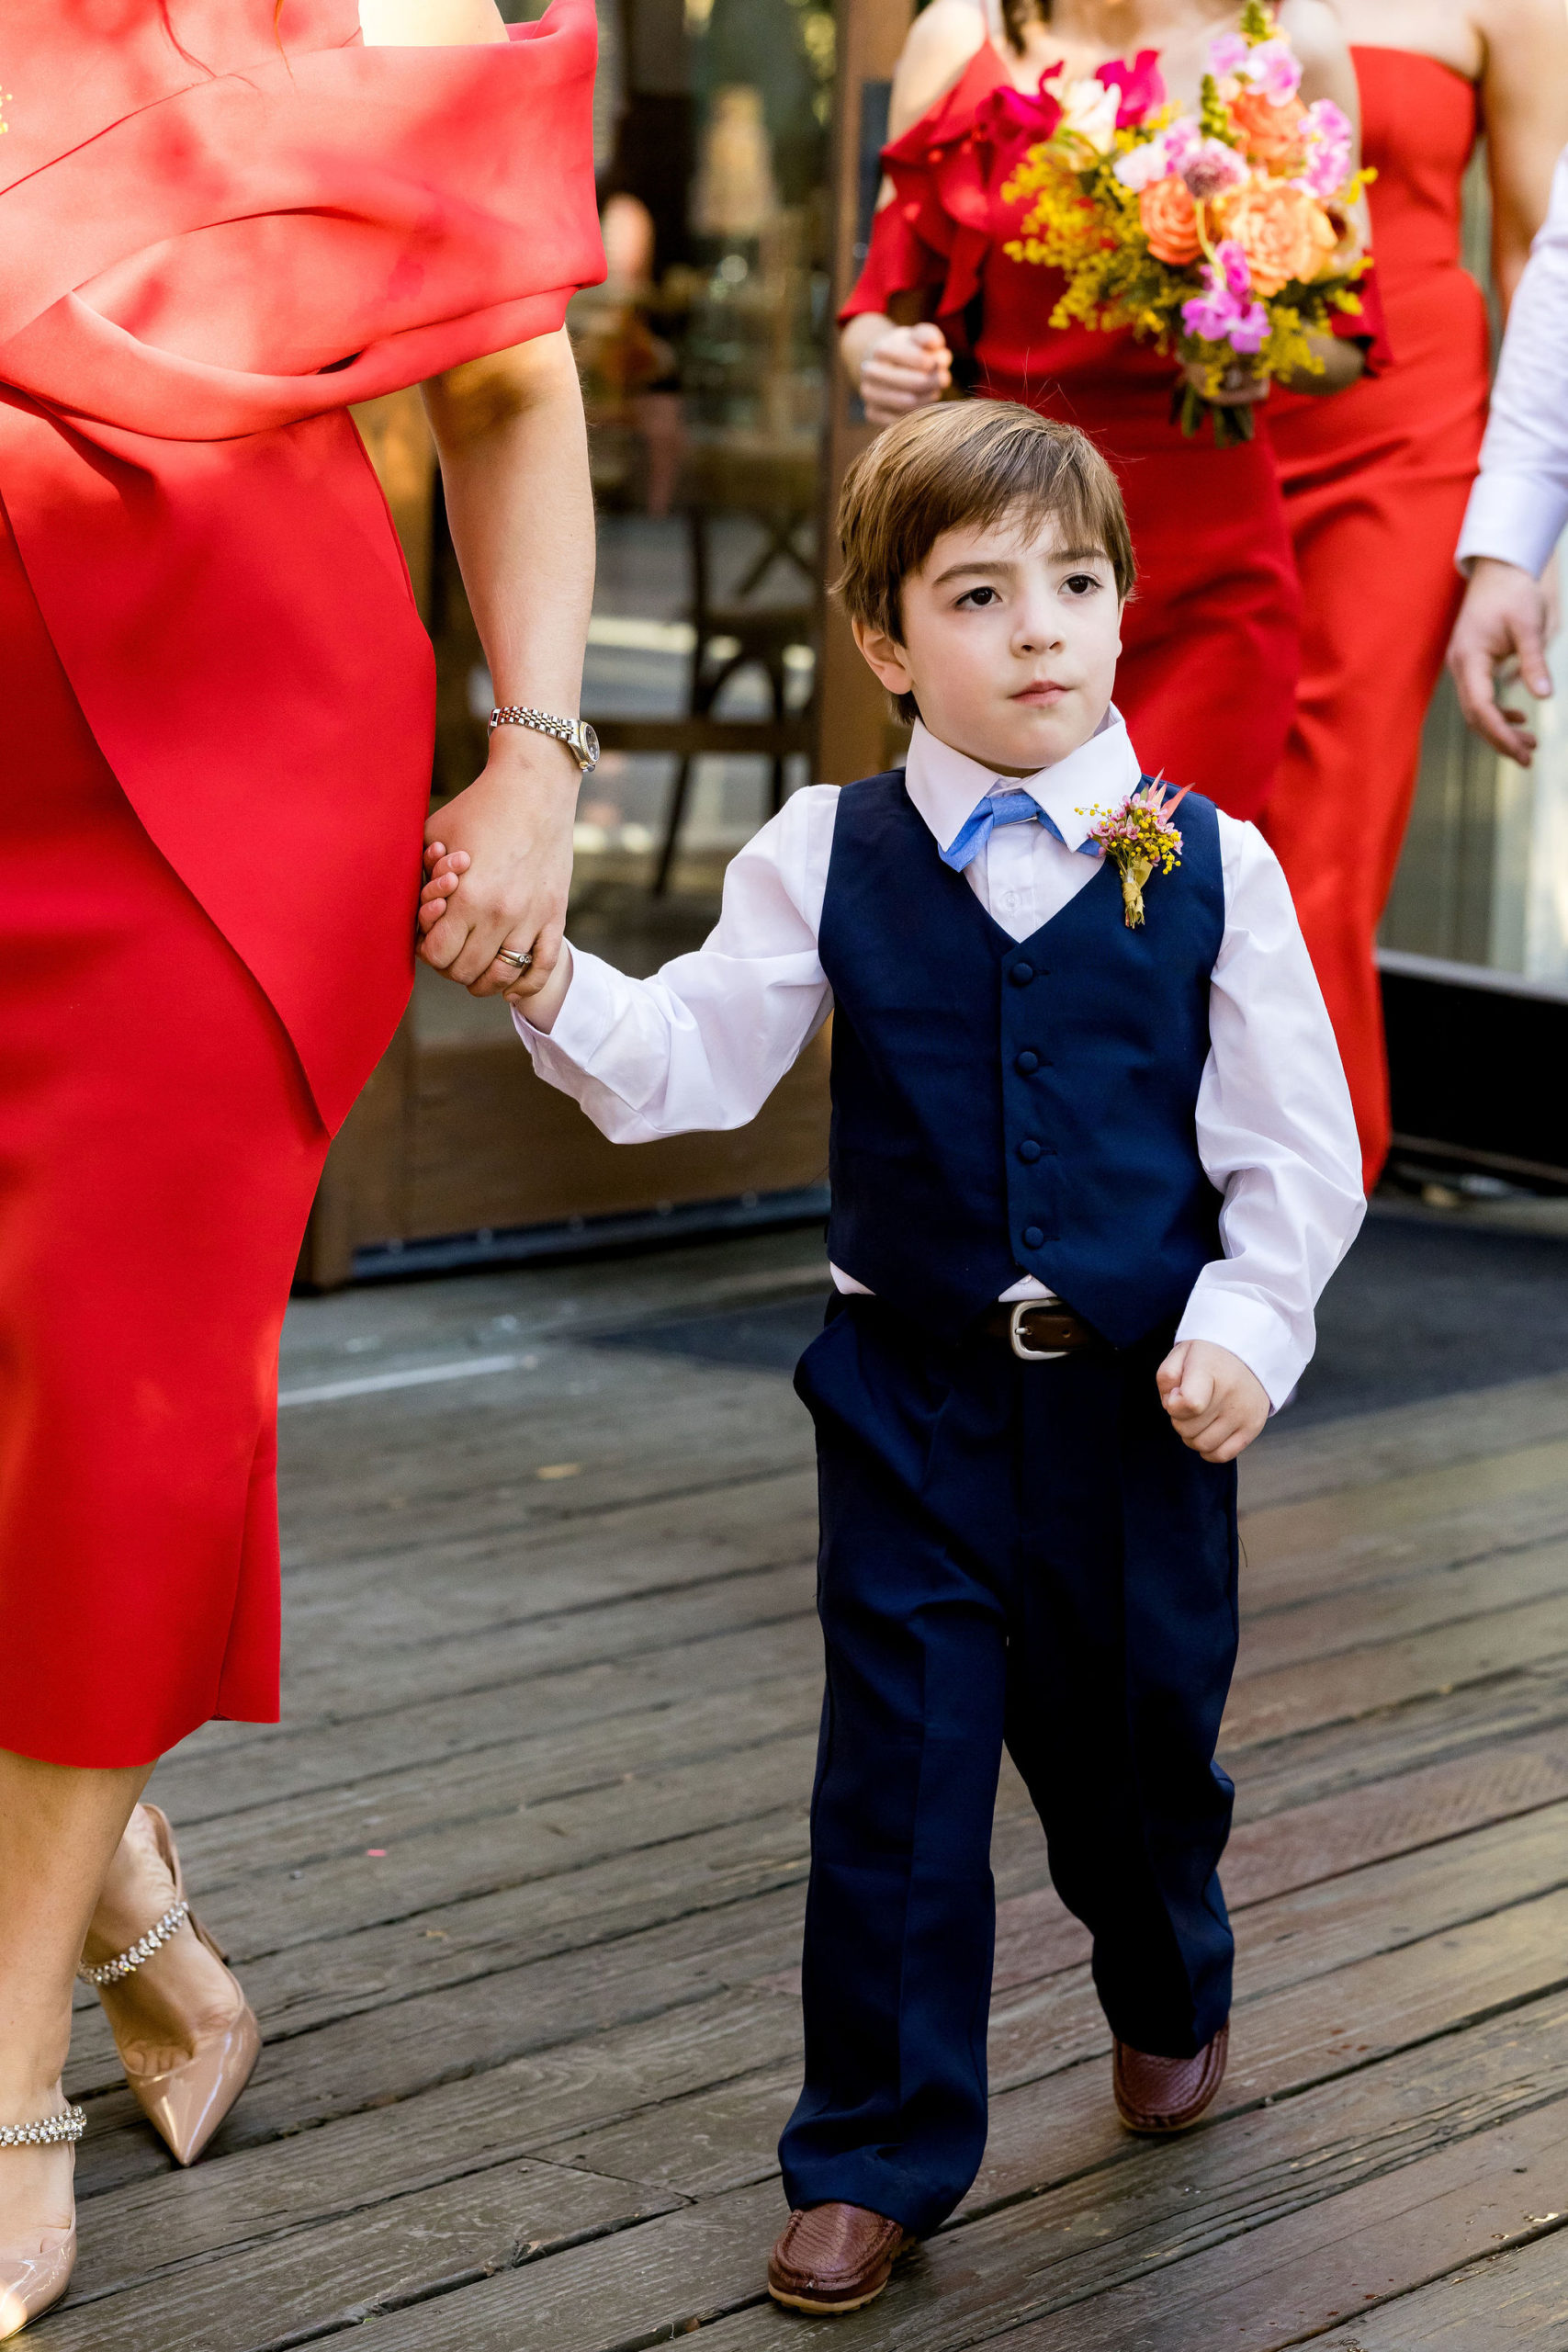 ring bearer with blue vest and bow tie walking down aisle with bridesmaids in red dresses